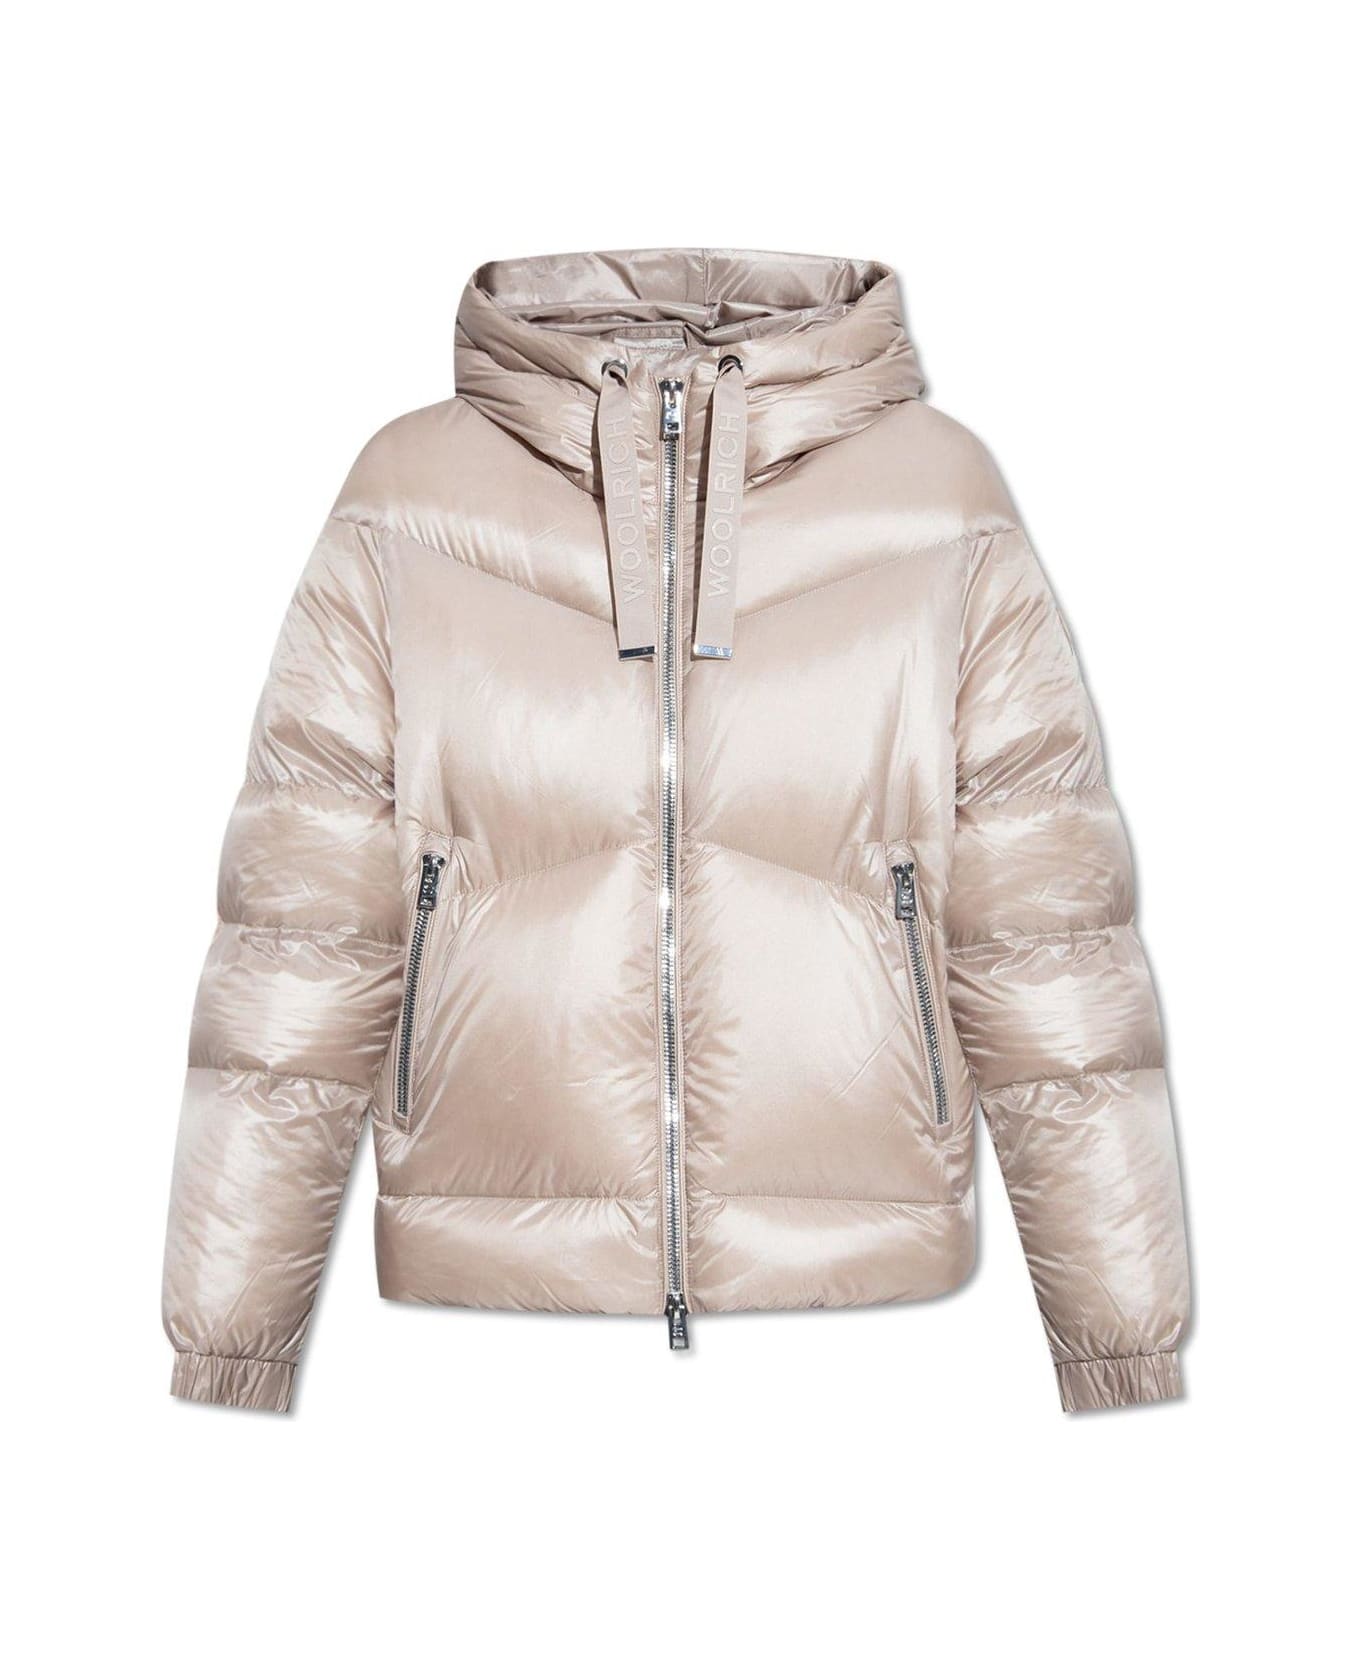 Woolrich Drawstring Hooded Puffer Jacket - LIGHT TAUPE